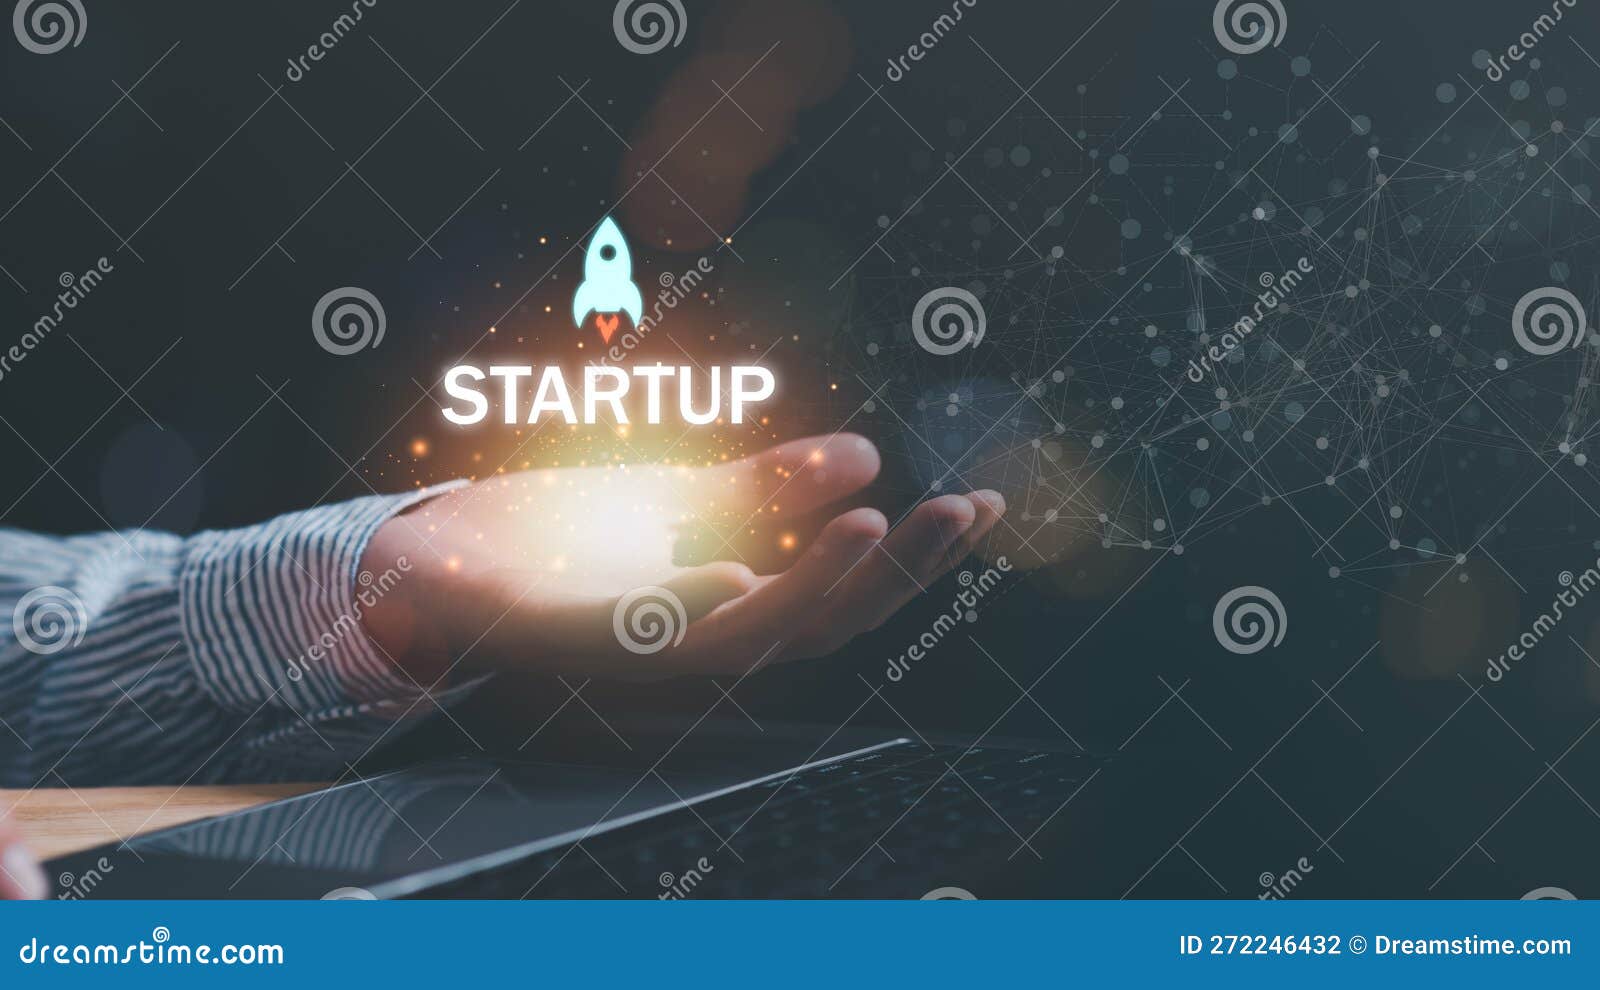 new business startups for young entrepreneurs, new business development ideas, creativity to bring technology to the next level,